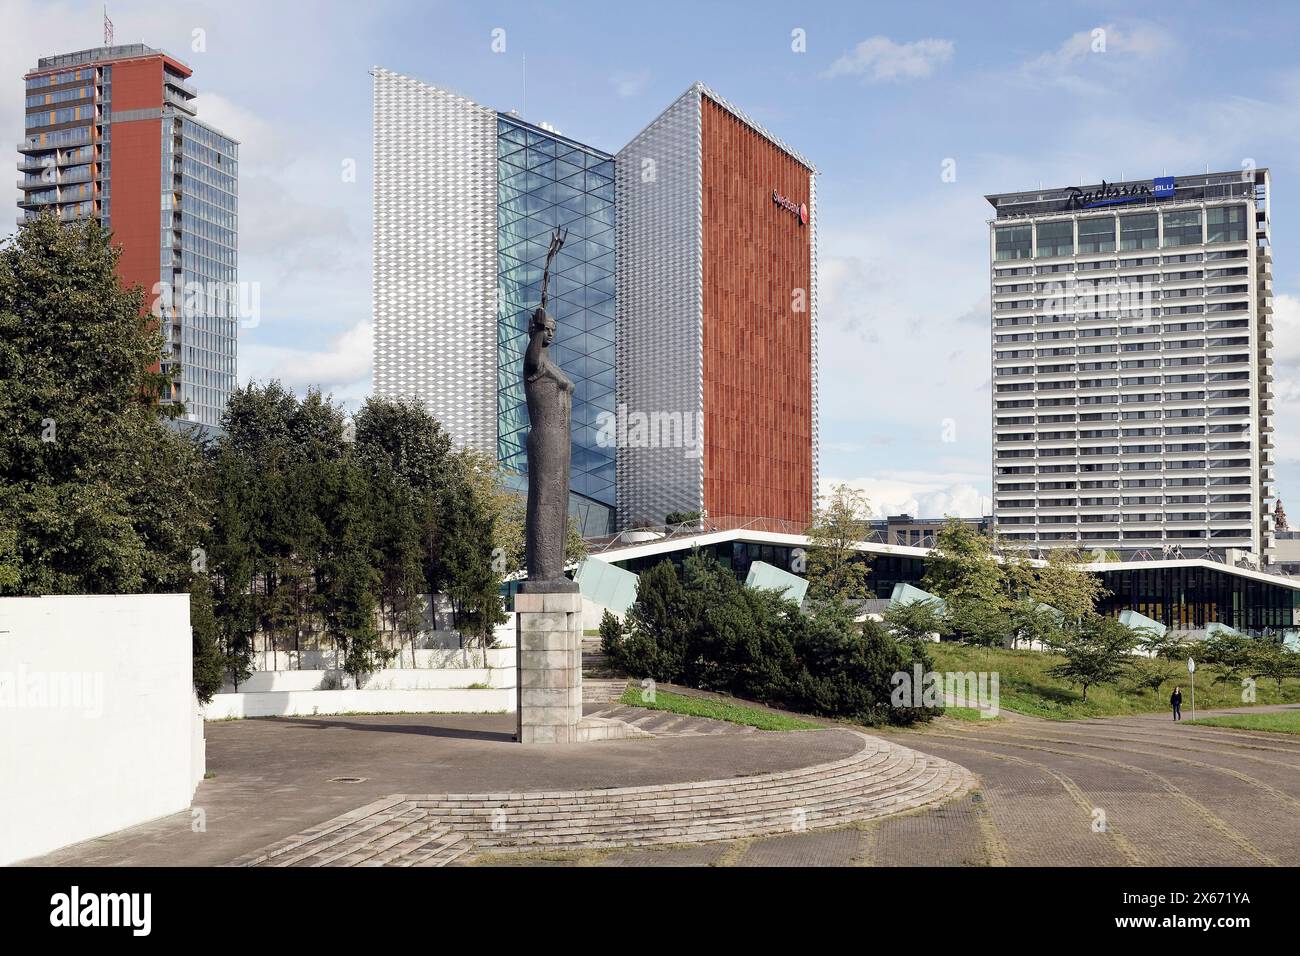 General view of area with several towers and statue in the foreground. SwedBank Vilnius, Lithuania, Vilnius, Lithuania. Architect: Audrius Ambrasas Ar Stock Photo